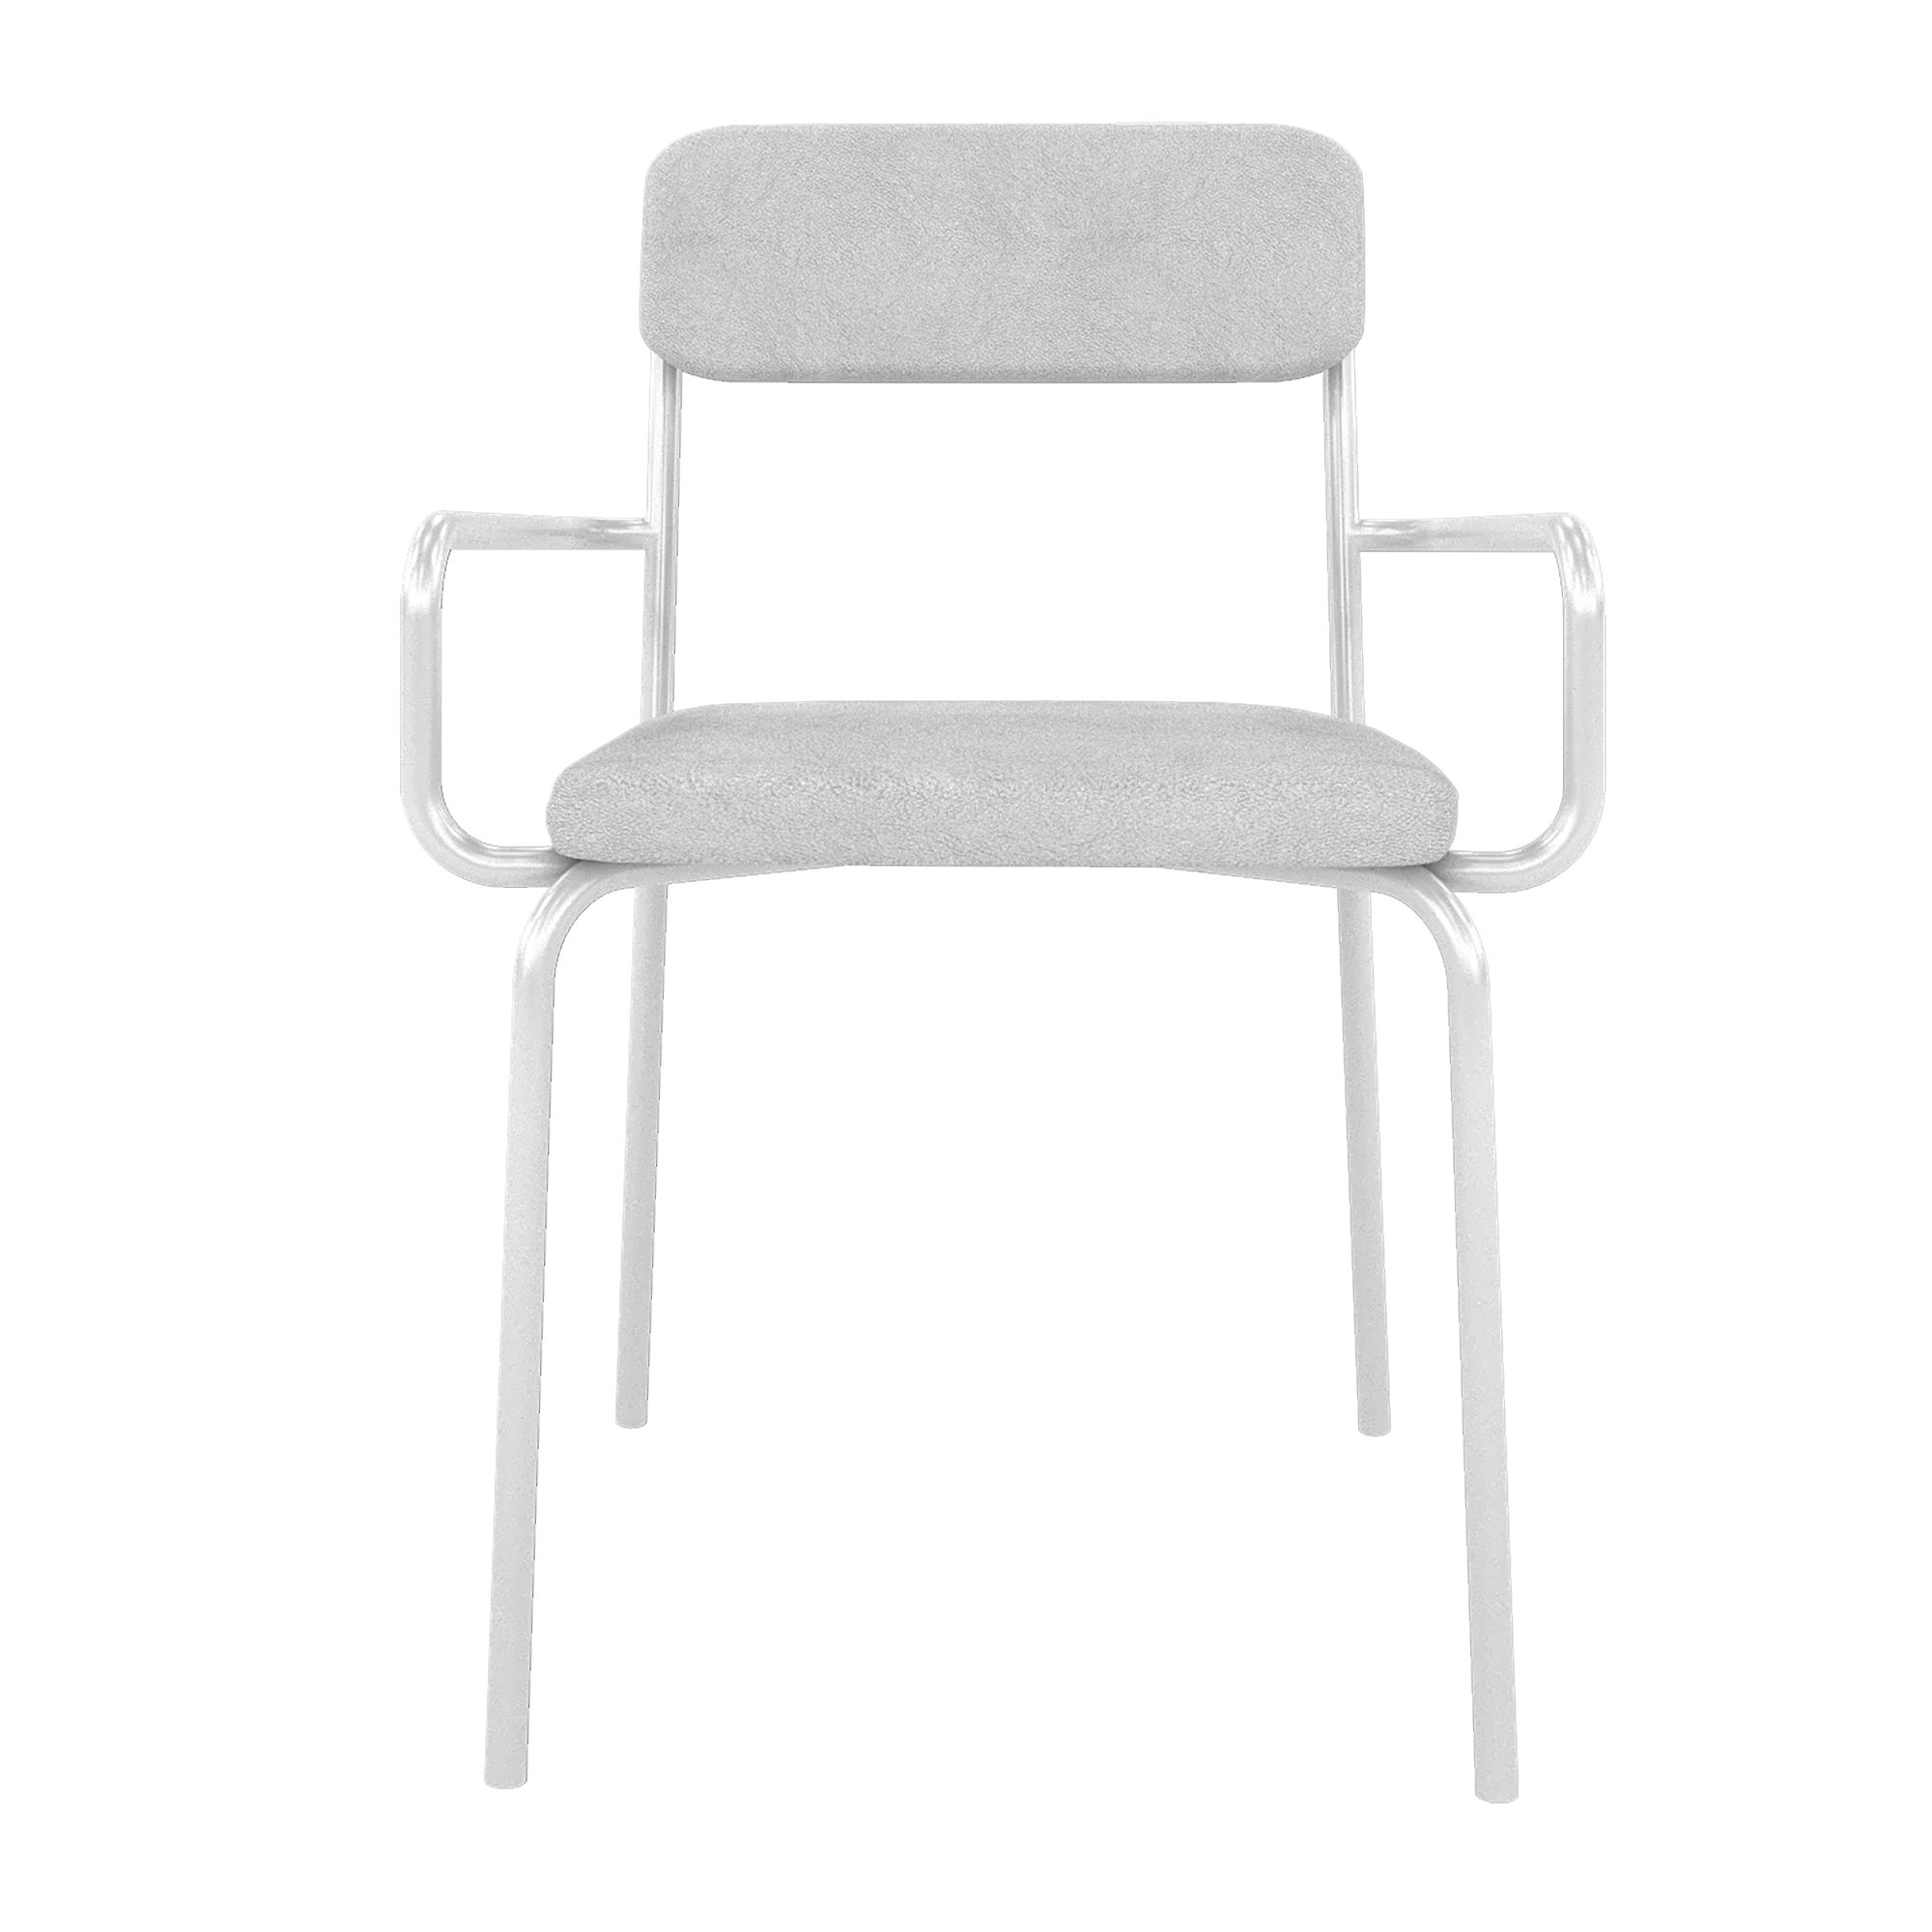 Manhattan Comfort, Whythe PU Leather Chair in White, Primary Color White, Included (qty.) 1 Model 2PZ